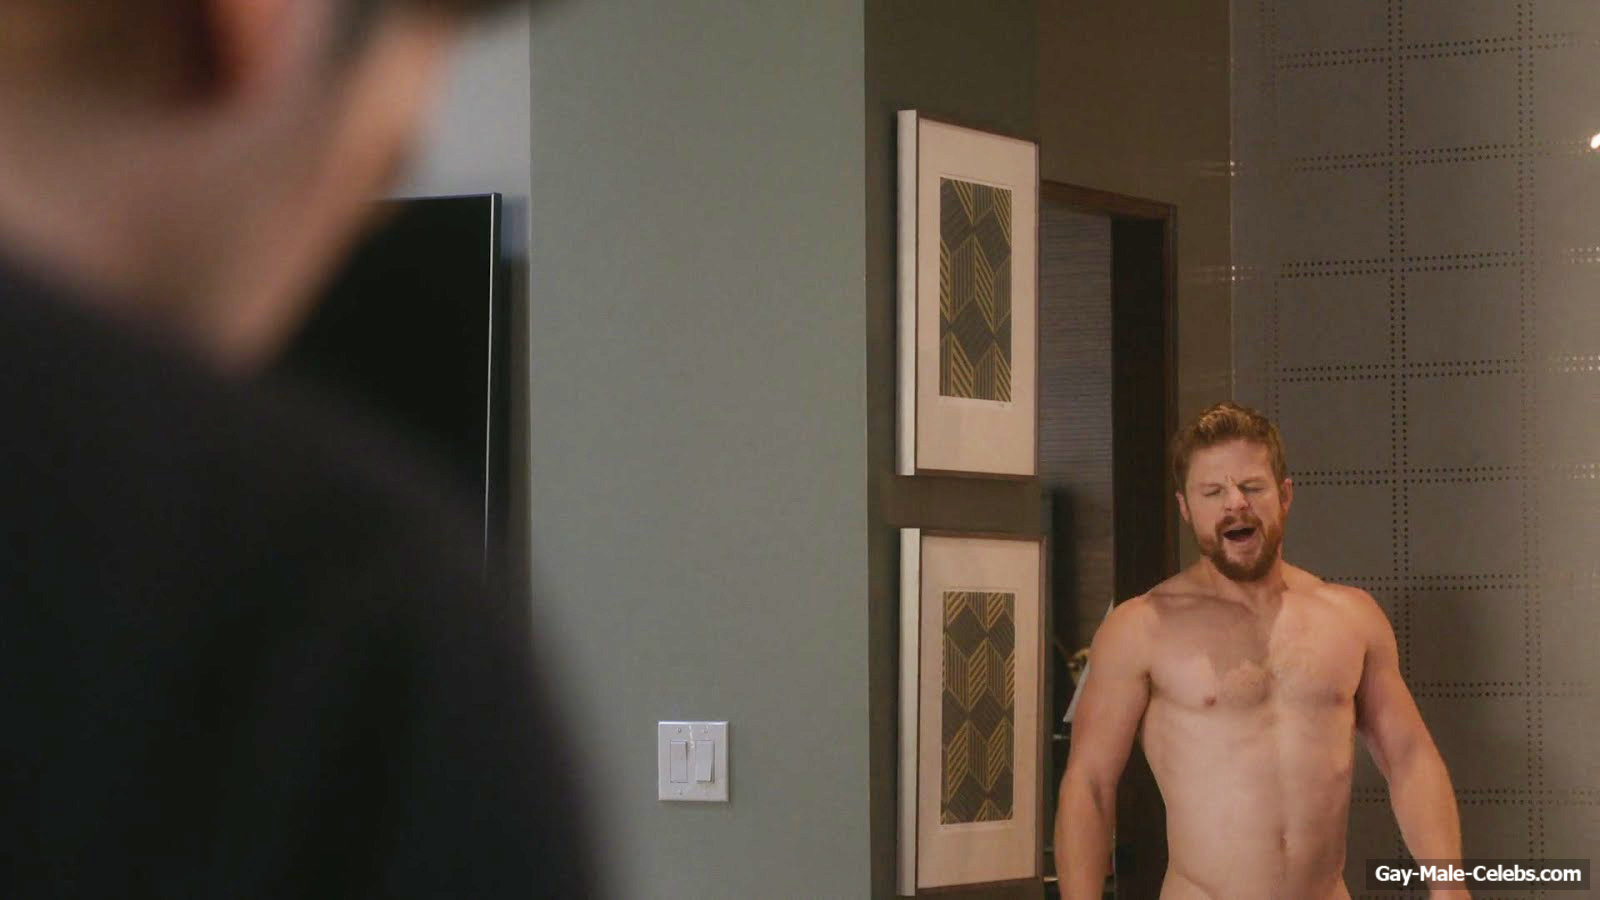 Derek Smith Nude In Series What/If Episode: What Happened